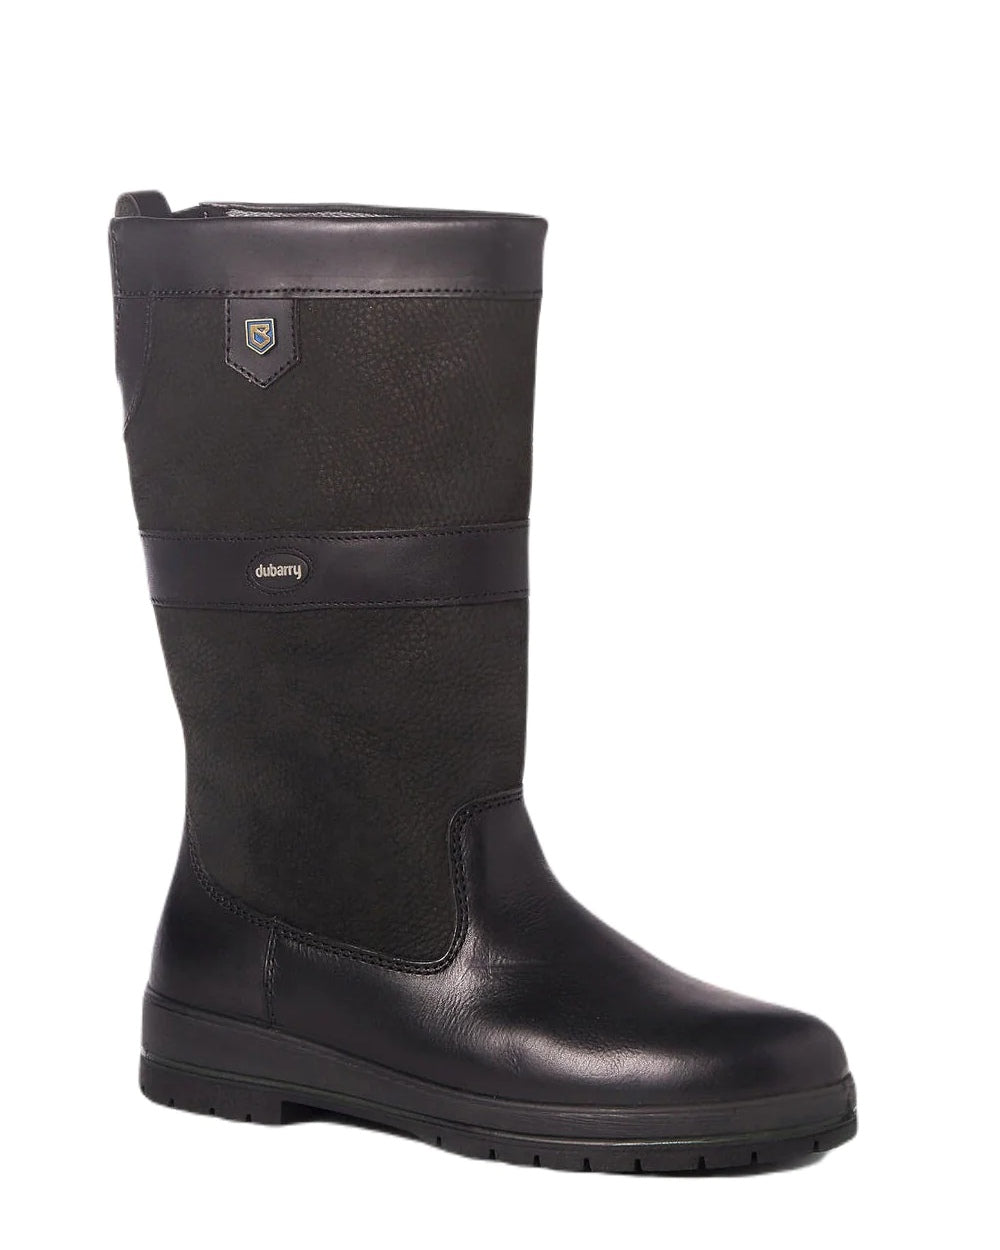 Dubarry Kildare Country Boots in Black 